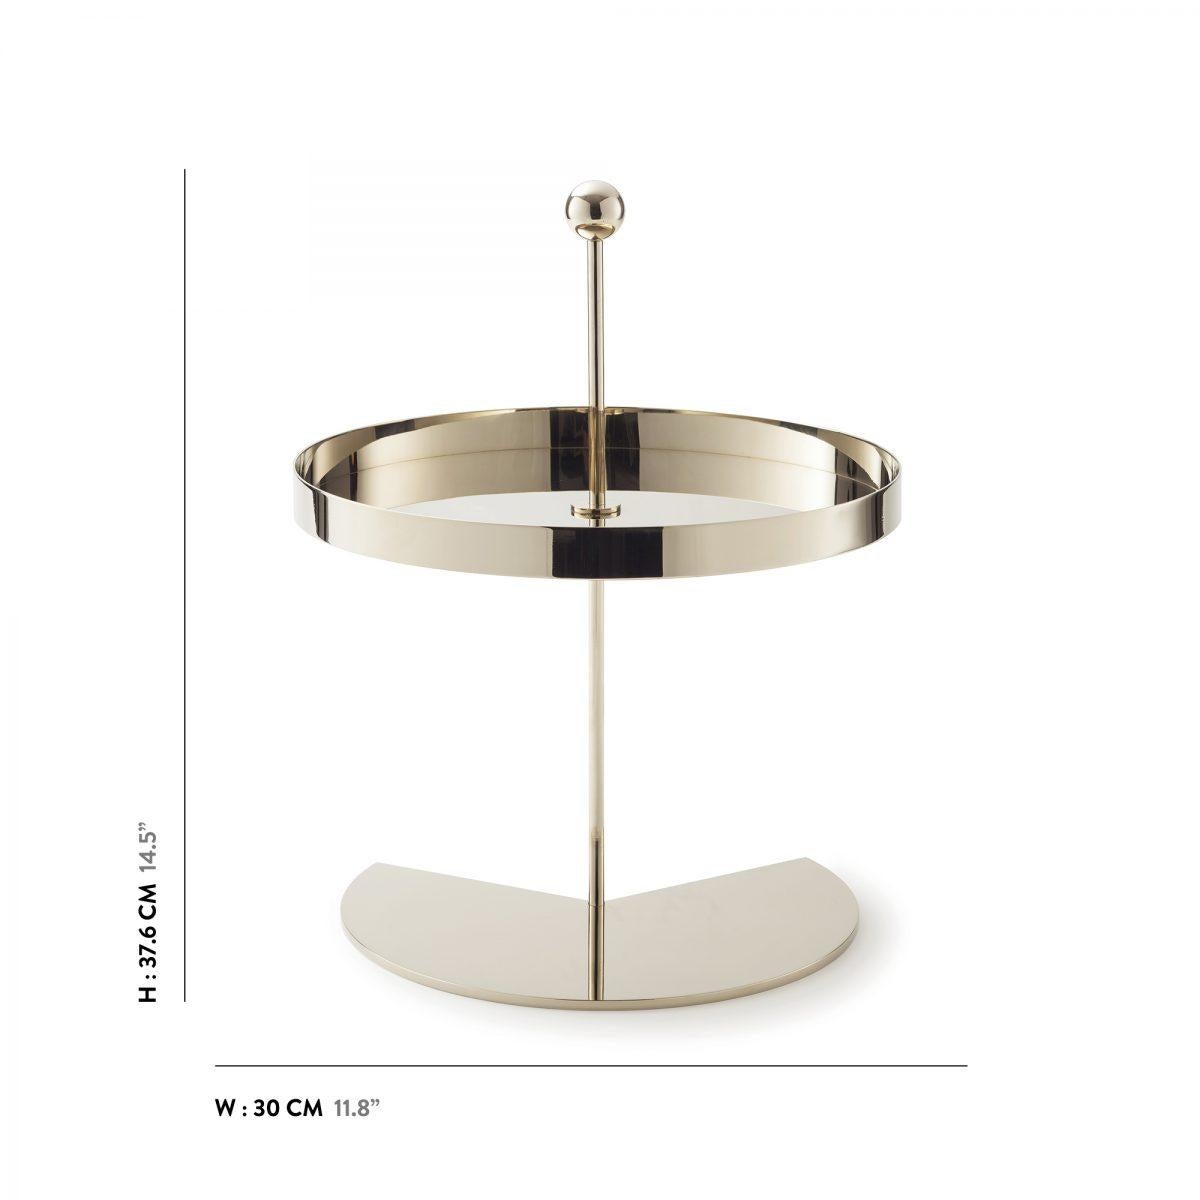 Modern Off the Moon N°1 Cake Stand by Thomas Dariel